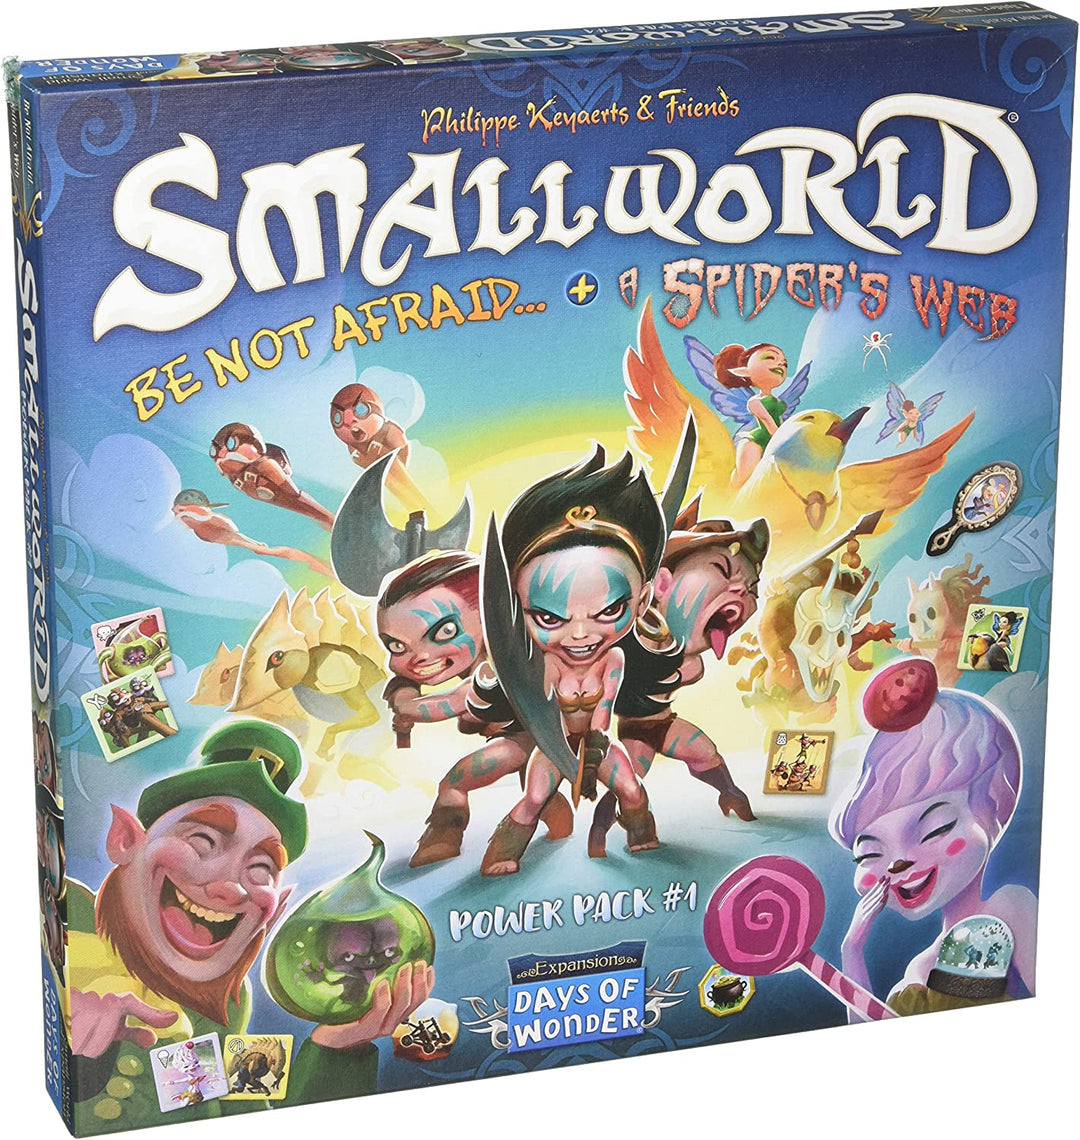 Days of Wonder | Small World Race Collection: Be Not Afraid & A Spider Web | Board Game